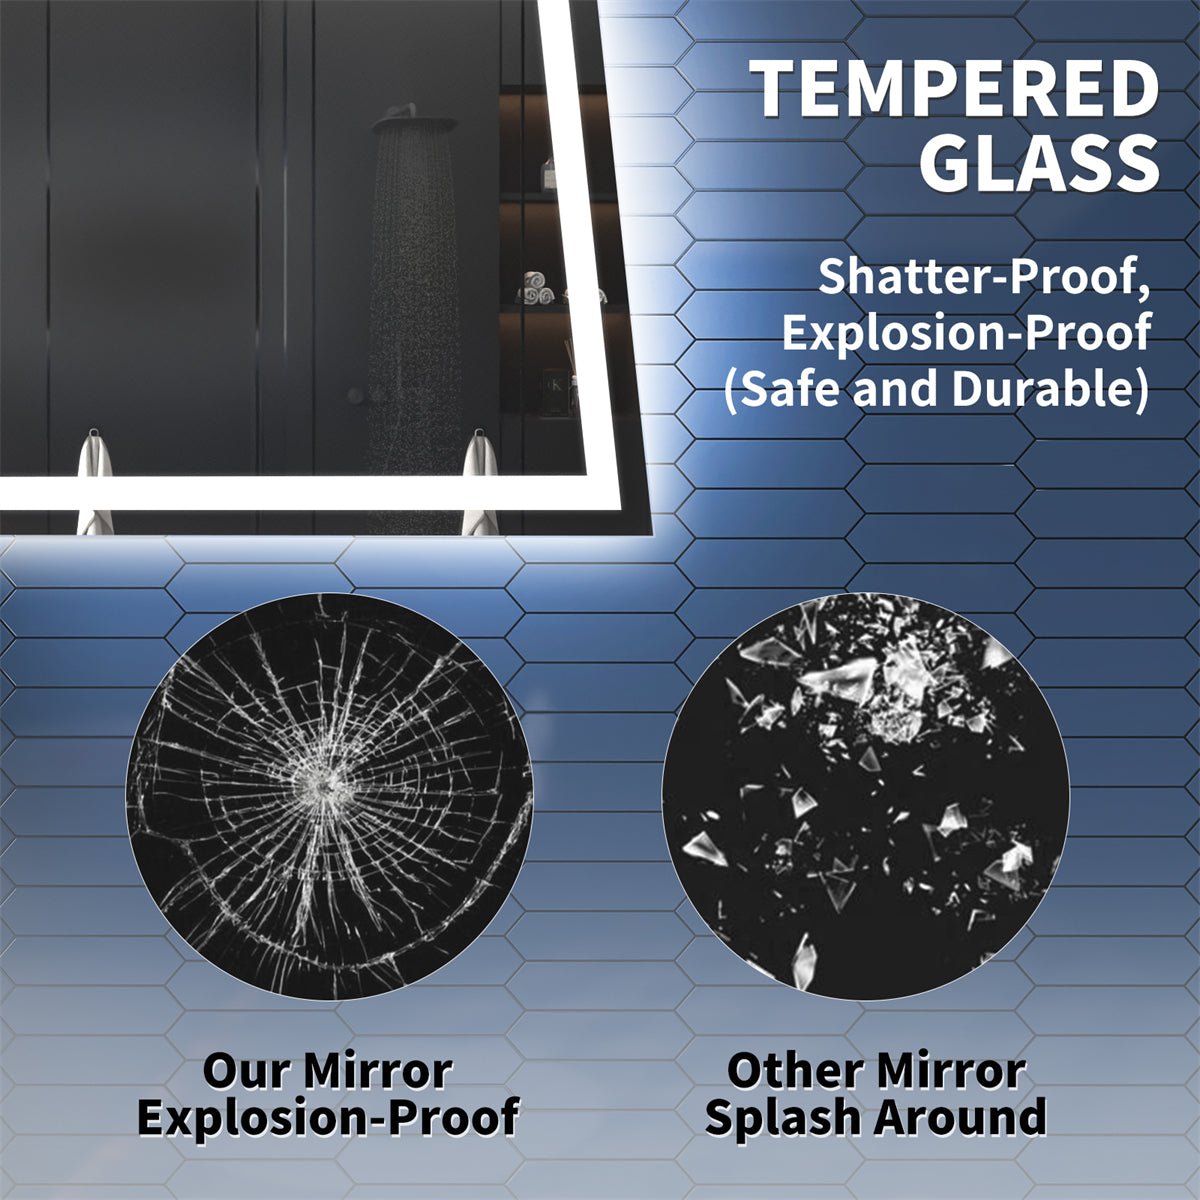 Apex 72" W x 36" H LED Bathroom Large Light Led Mirror,Anti Fog,Dimmable,Dual Lighting Mode,Tempered Glass